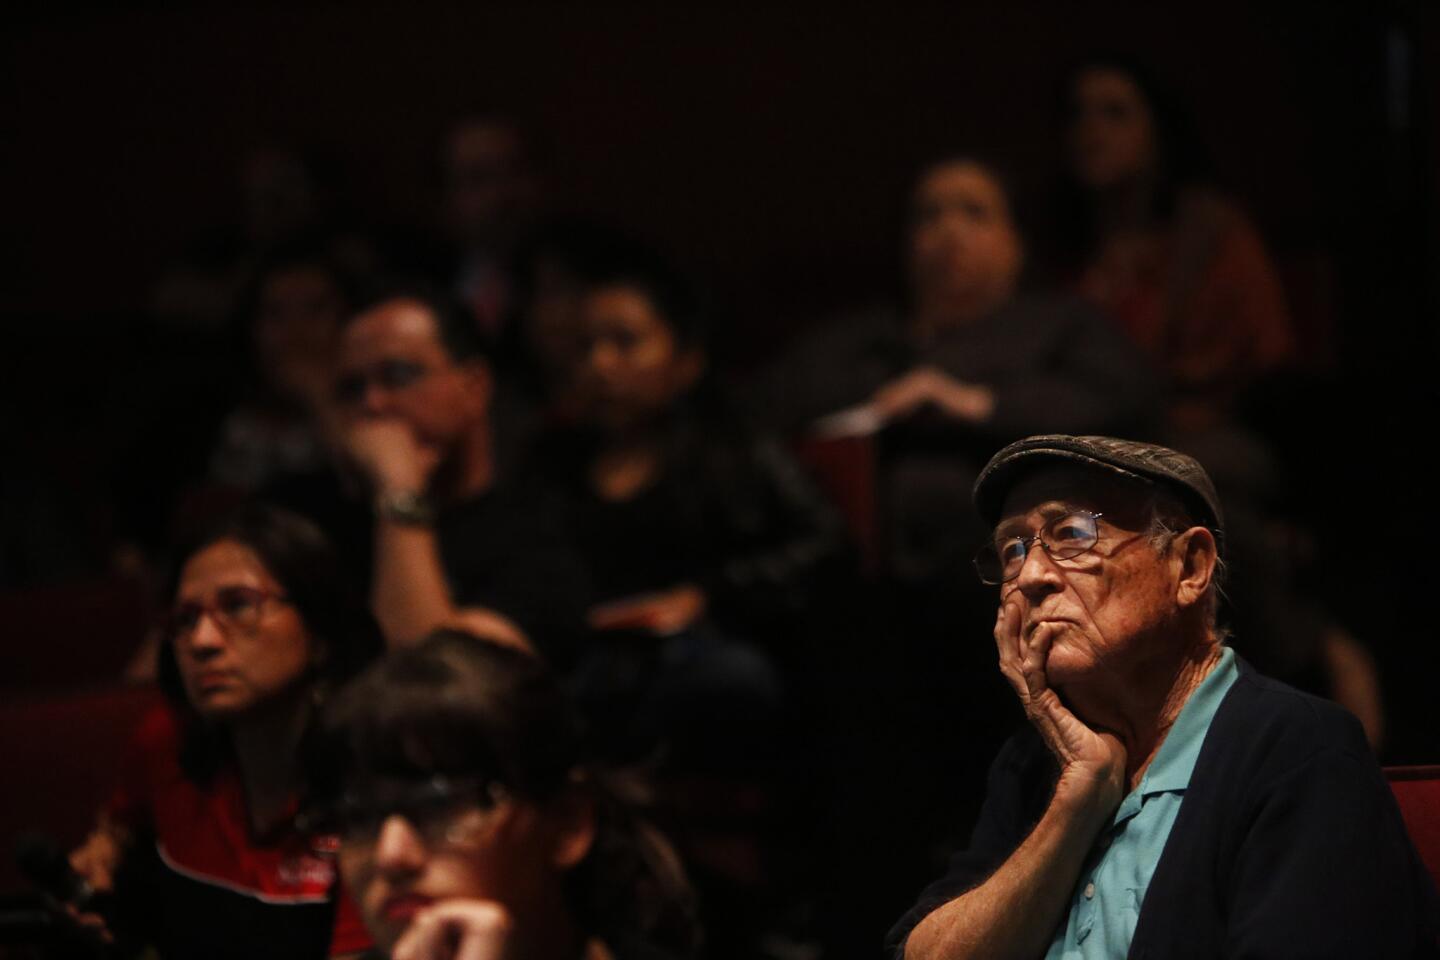 Jose Hernandez, a Chicano studies professor at Cal State Northridge, listens to the school's dean of students talk about plans to limit enrollment by setting higher admission standards.